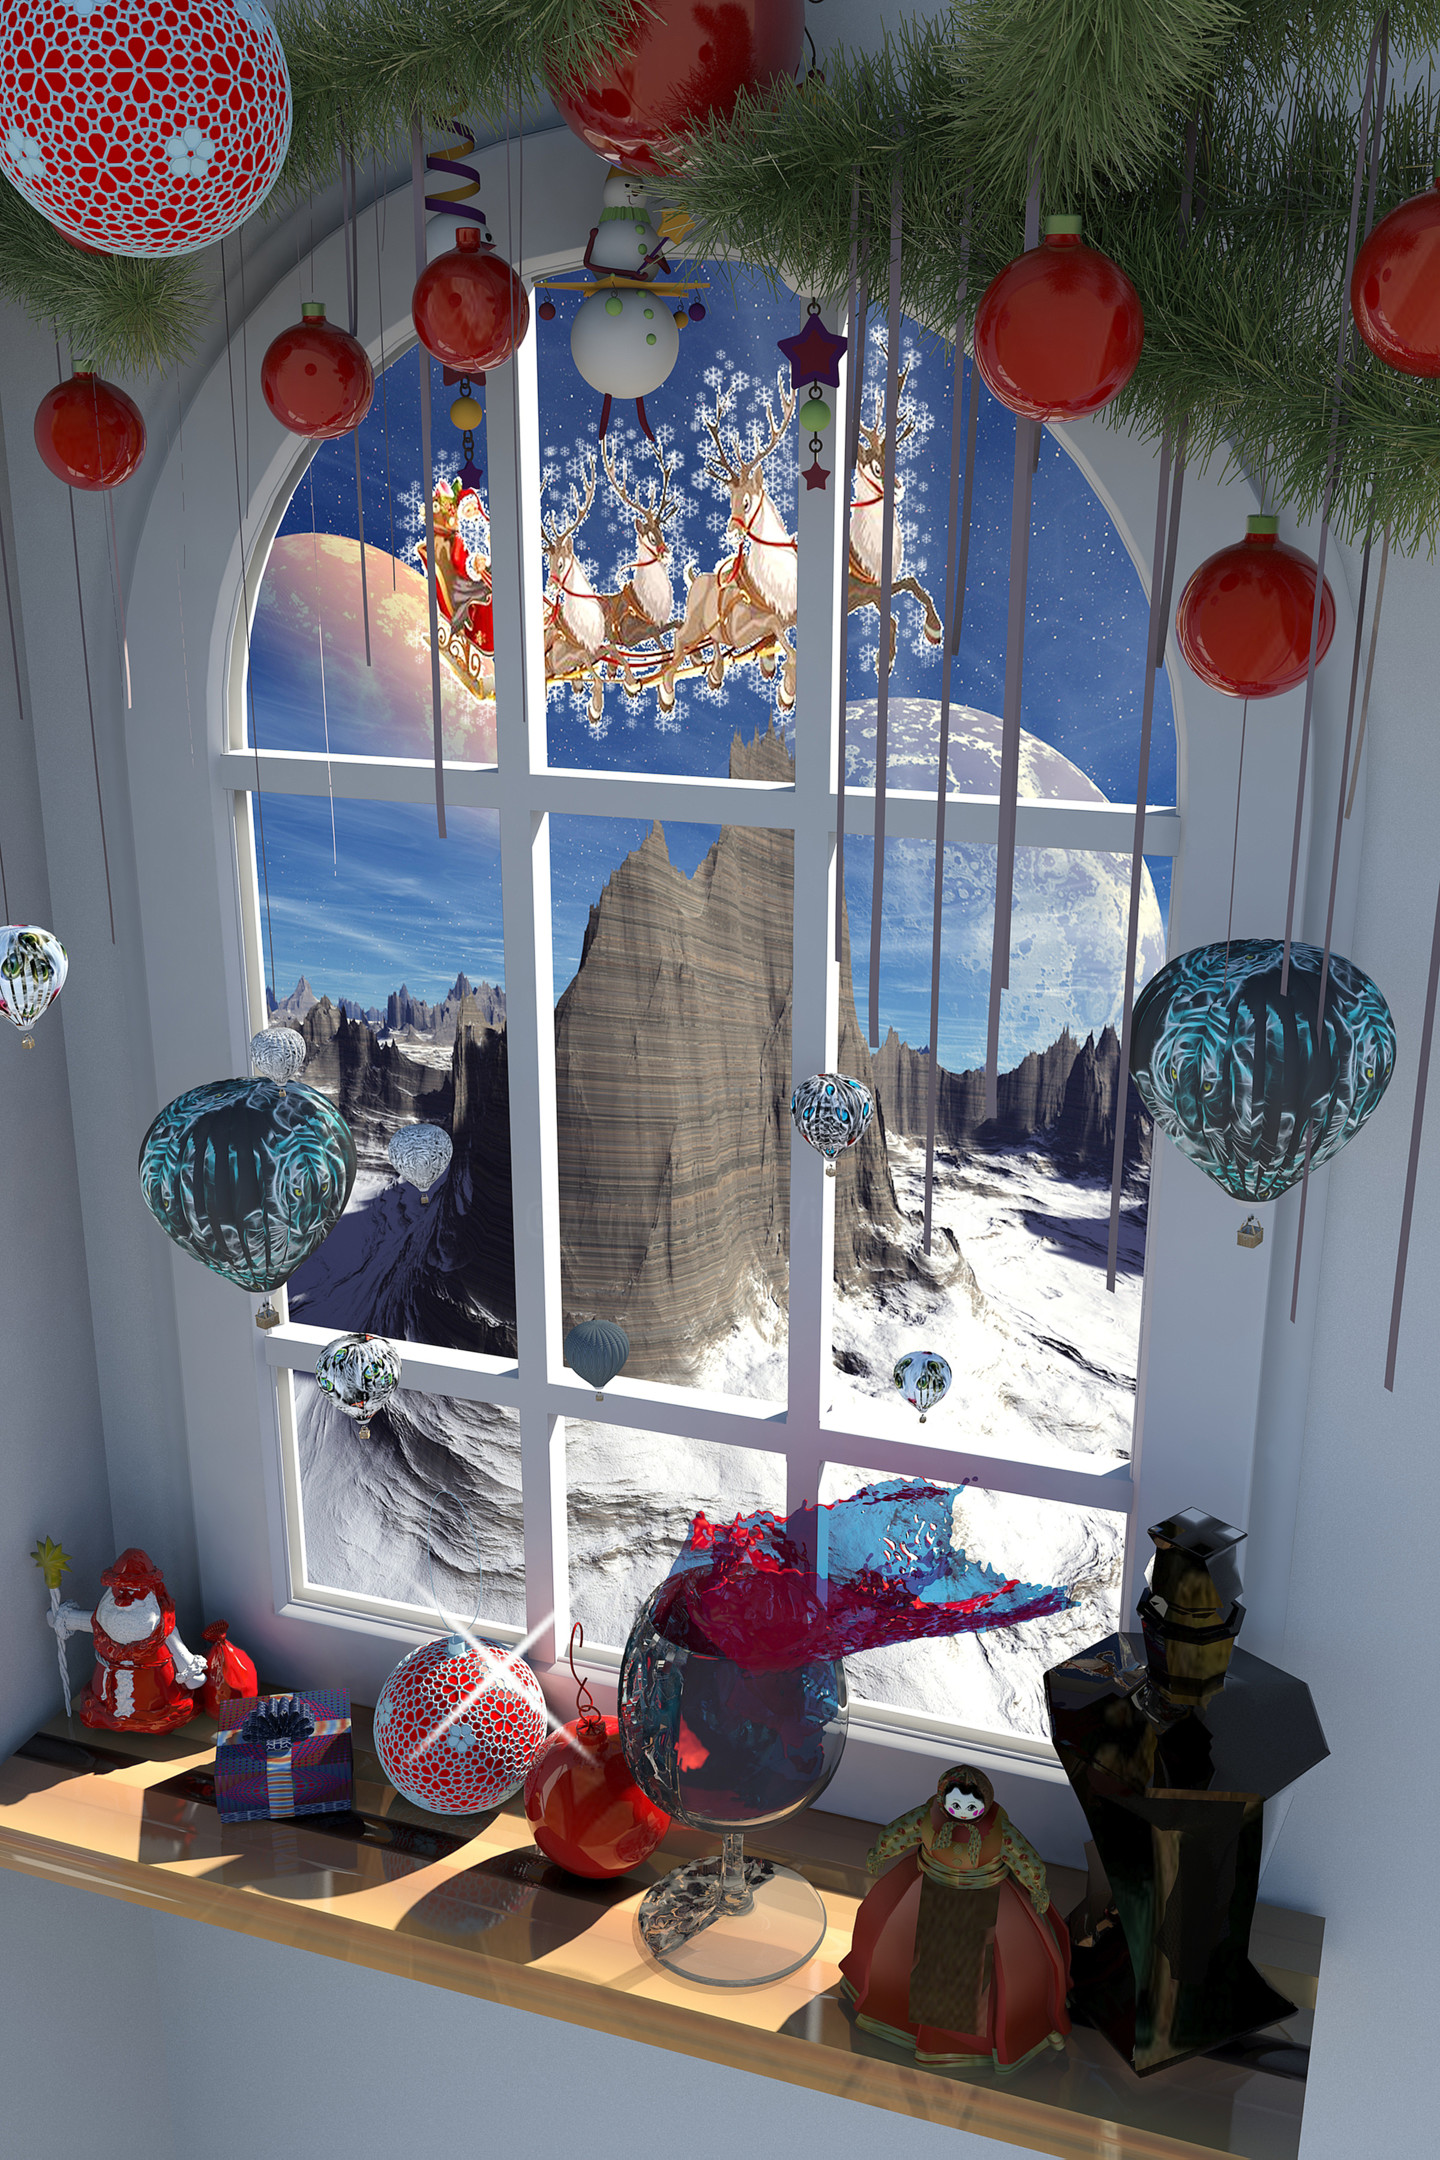 Artists to Watch: Holiday Window Edition